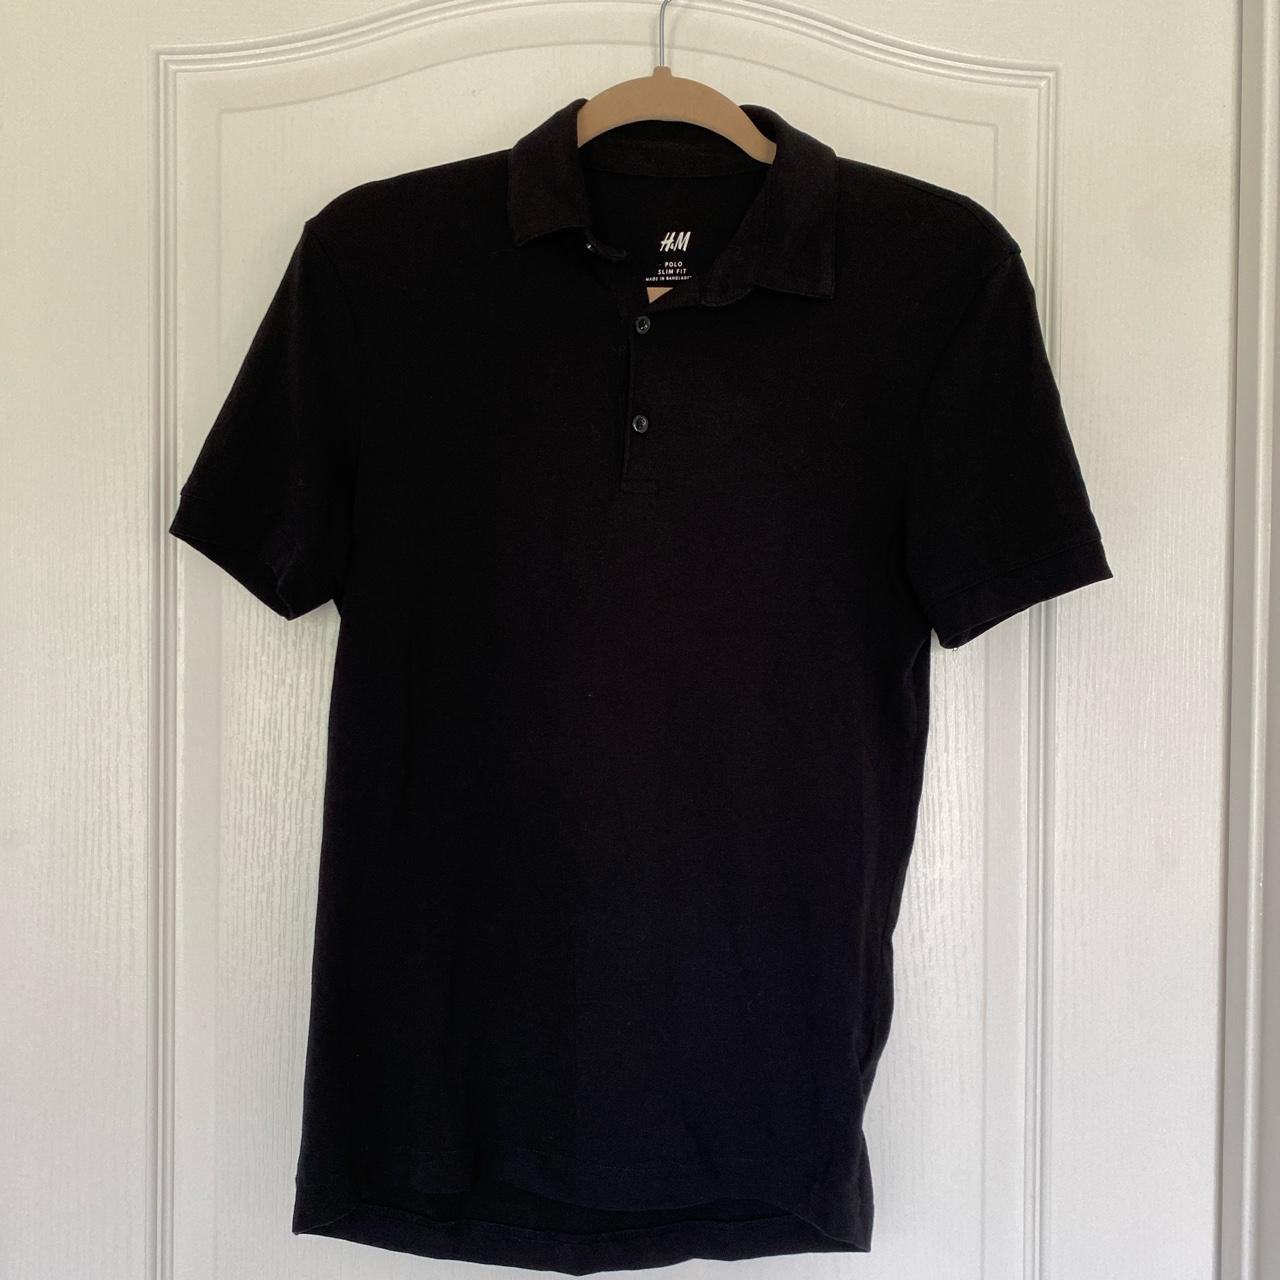 Black Polo!! A great basic polo for any occasion •... - Depop